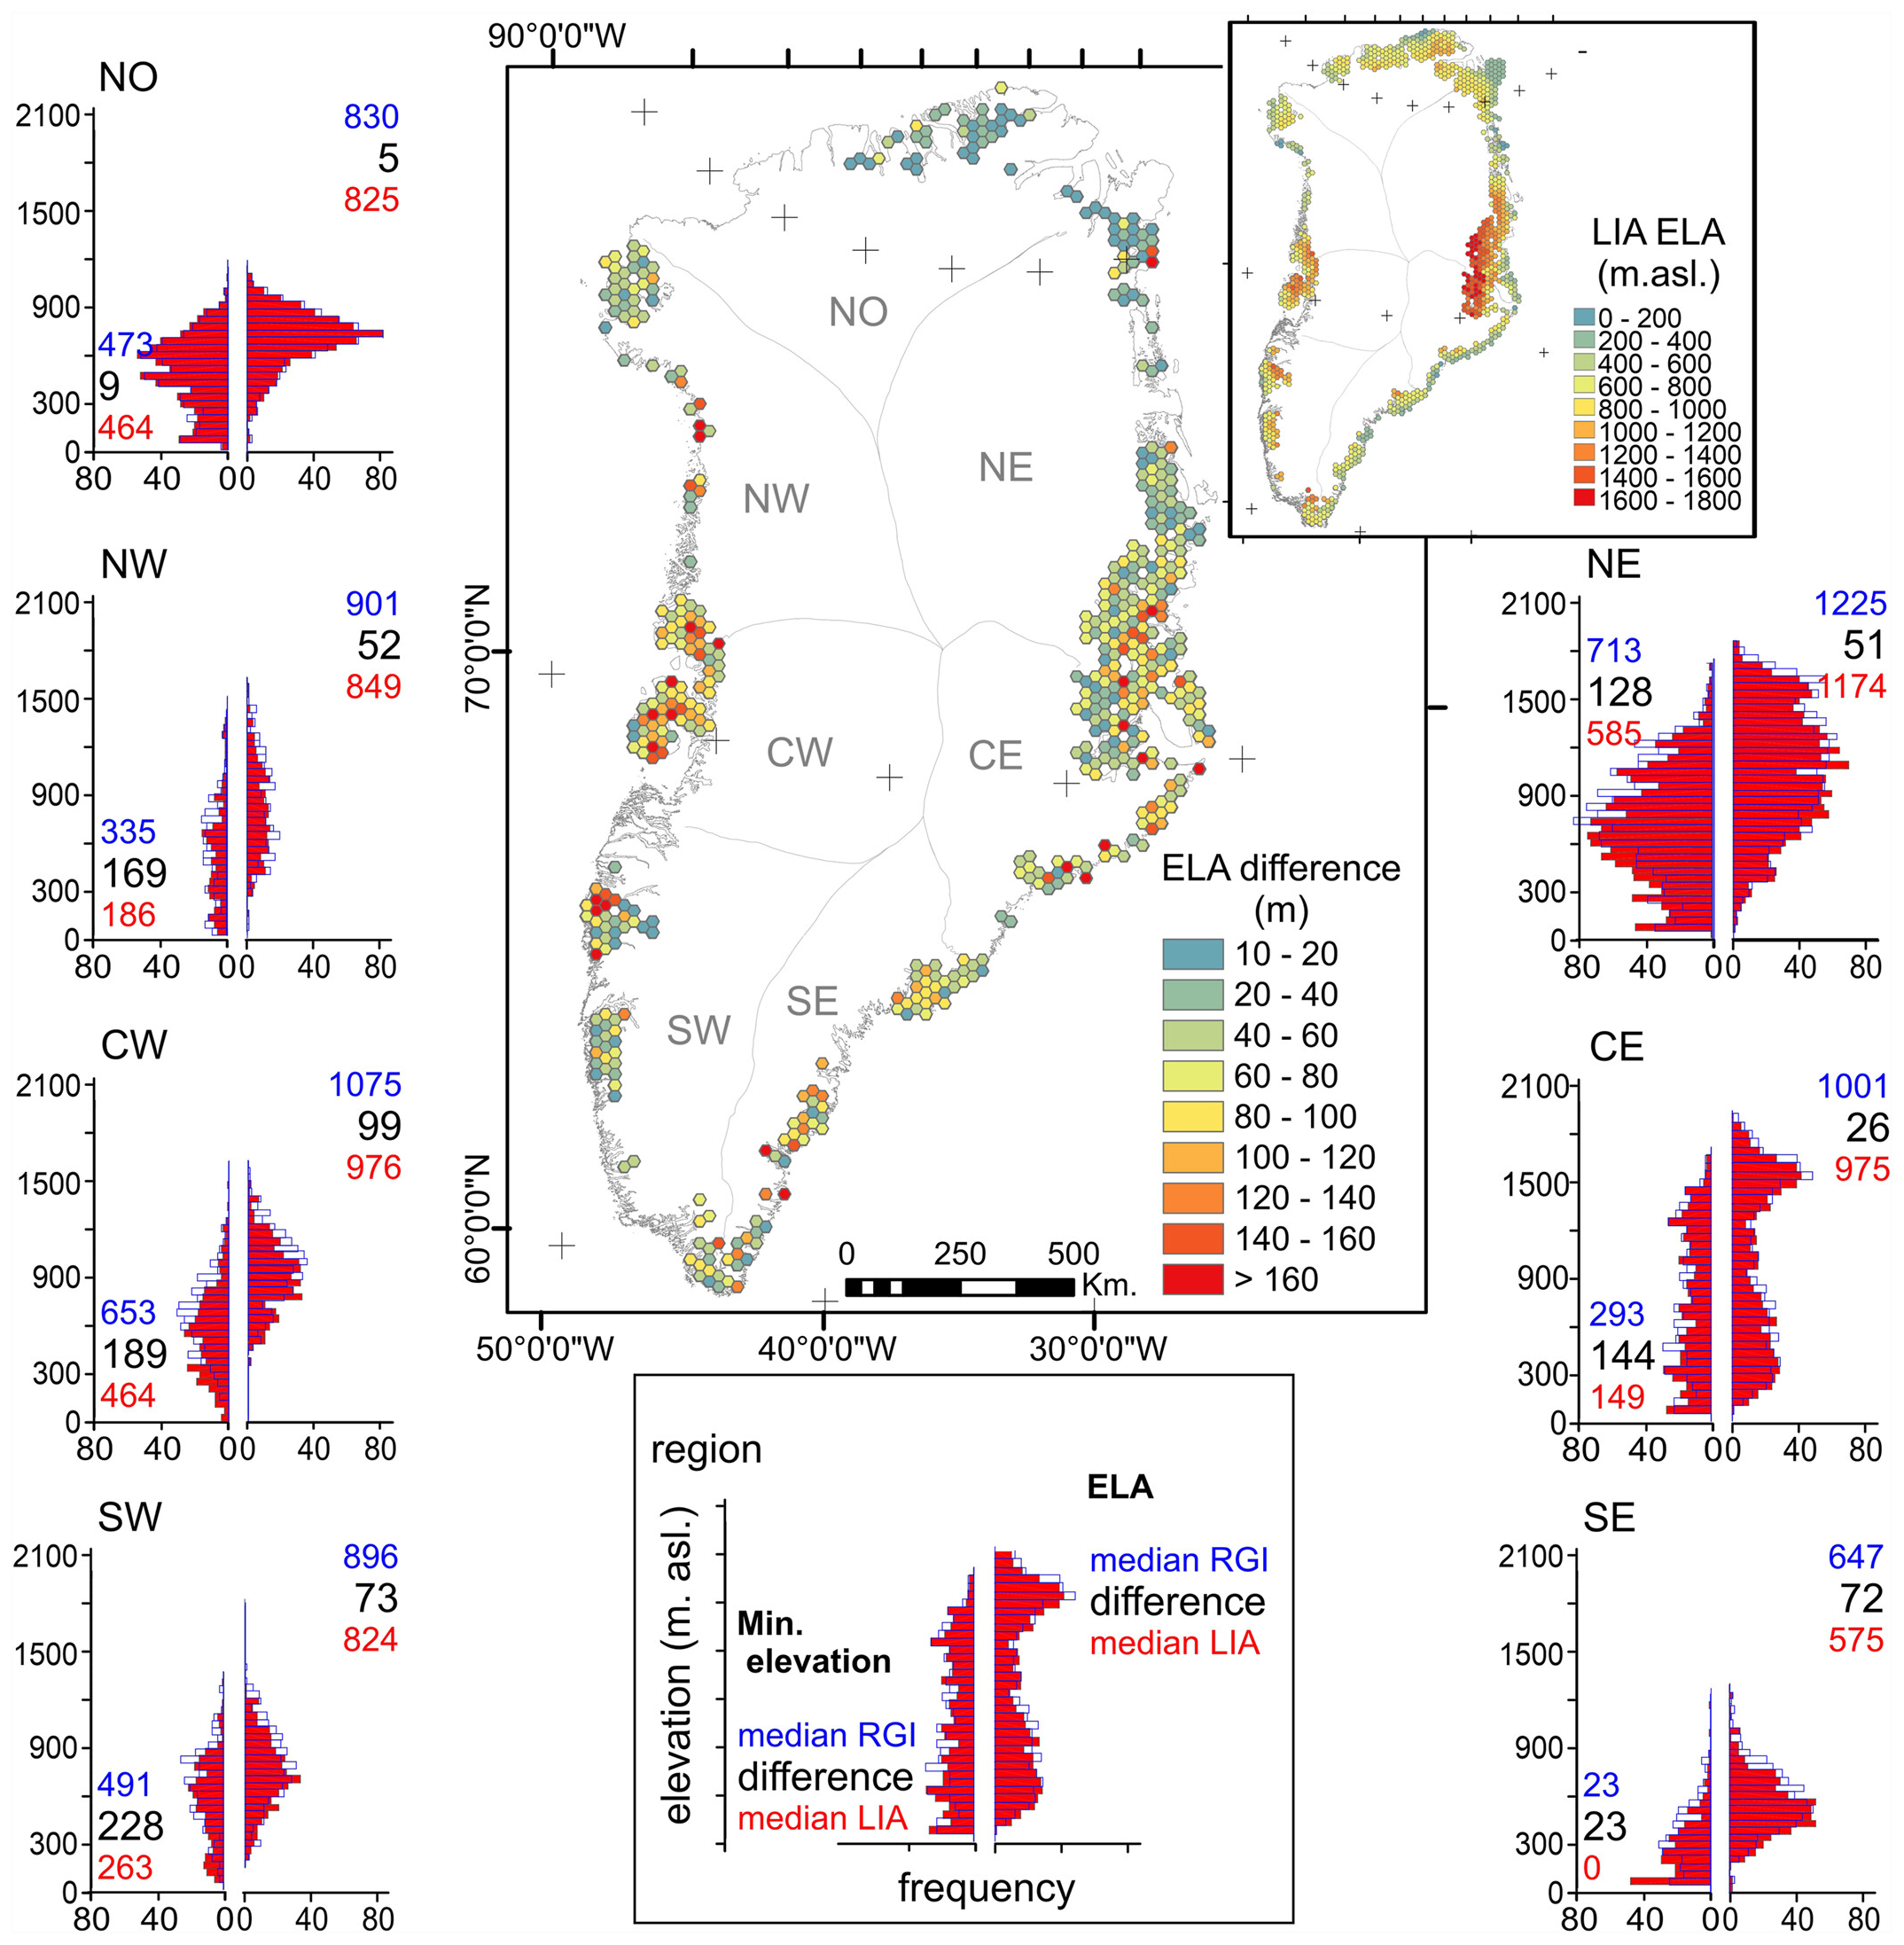 Equilibrium Line Altitude (ELA) and terminus elevation (Min. elevation) across Greenland for Glaciers and Ice Caps (GICs) during the Little Ice Age (LIA) termination (red bars) and 2015 (blue outline bars) by region north (NO), north west (NW), north east (NE), central west (CW), central east (CE), south west (SW), and south east (SE). The mapped ELA difference depicts the mean ELA difference for all glaciers per colored hexagon. Graphic: Carrivick, et al., 2023 / Geophysical Research Letters 
